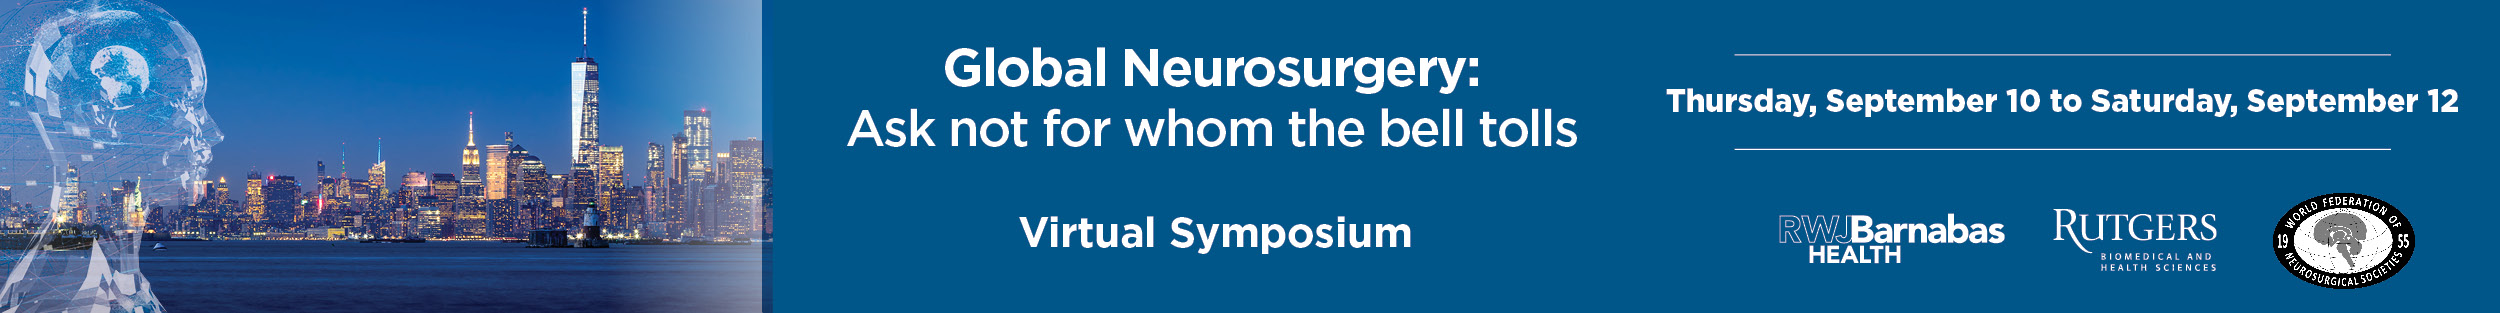 Global Neurosurgery:  Ask Not for Whom the Bell Tolls Banner